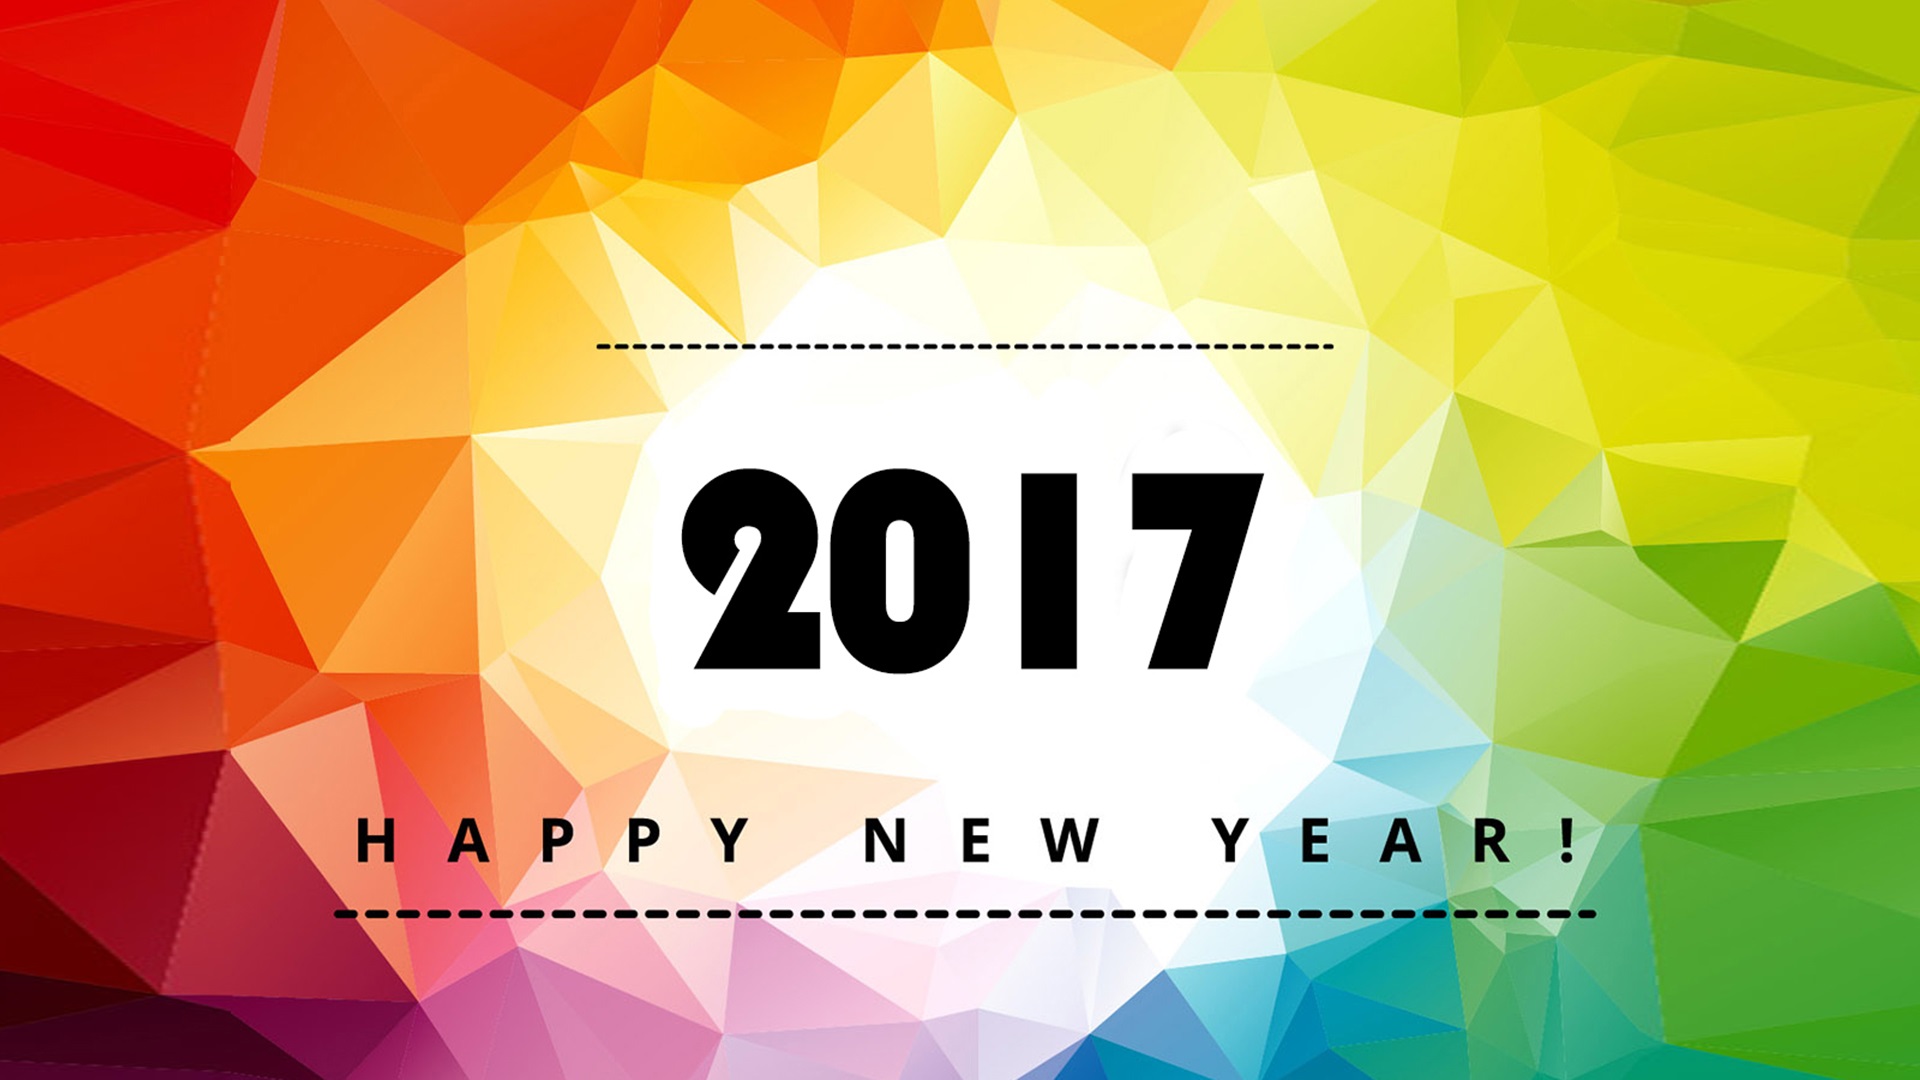 new year wallpaper 2017,text,font,graphic design,yellow,design